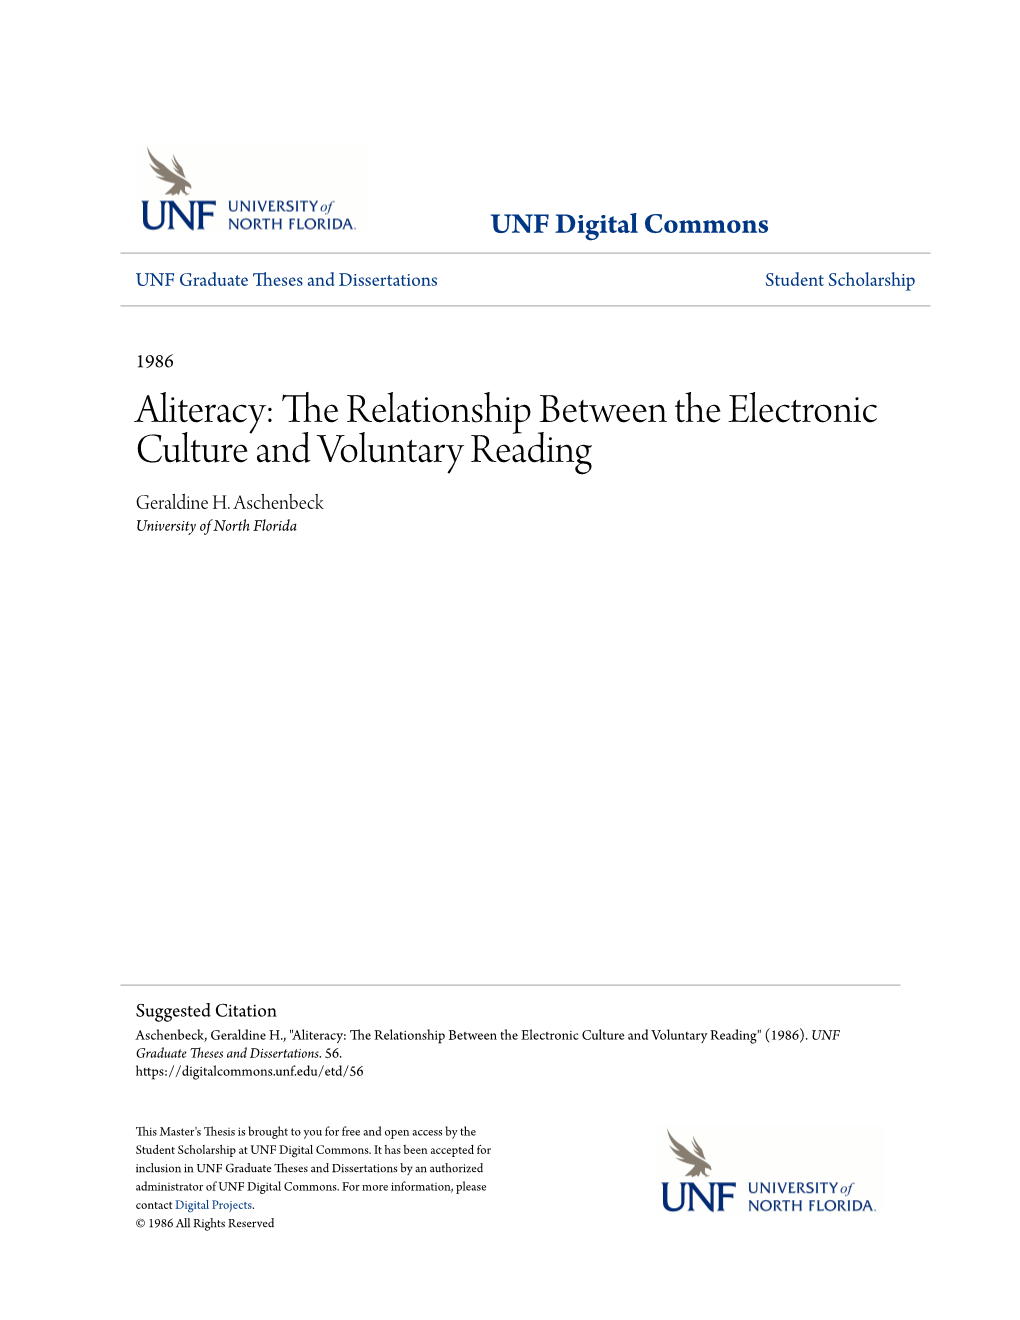 Aliteracy: the Relationship Between the Electronic Culture and Voluntary Reading Geraldine H